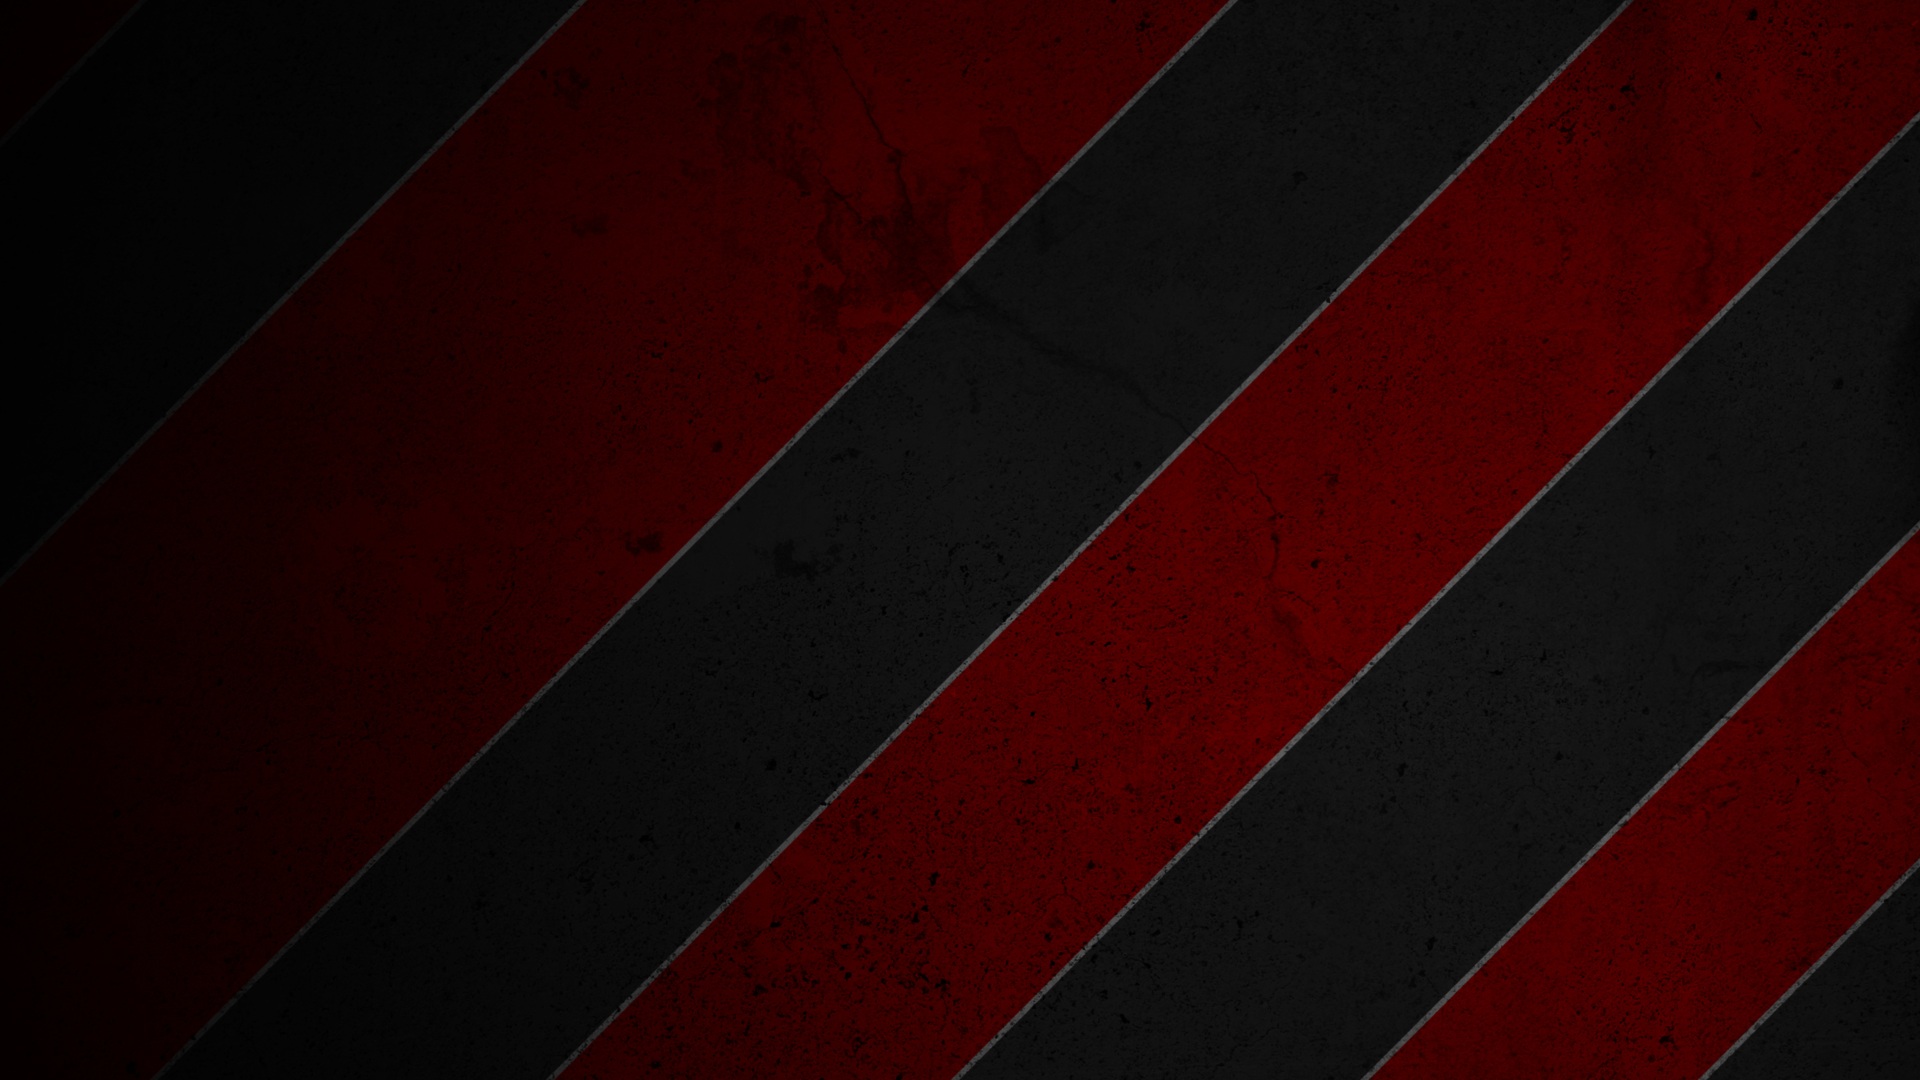 Cool Red And Black Background Designs Striped Dark